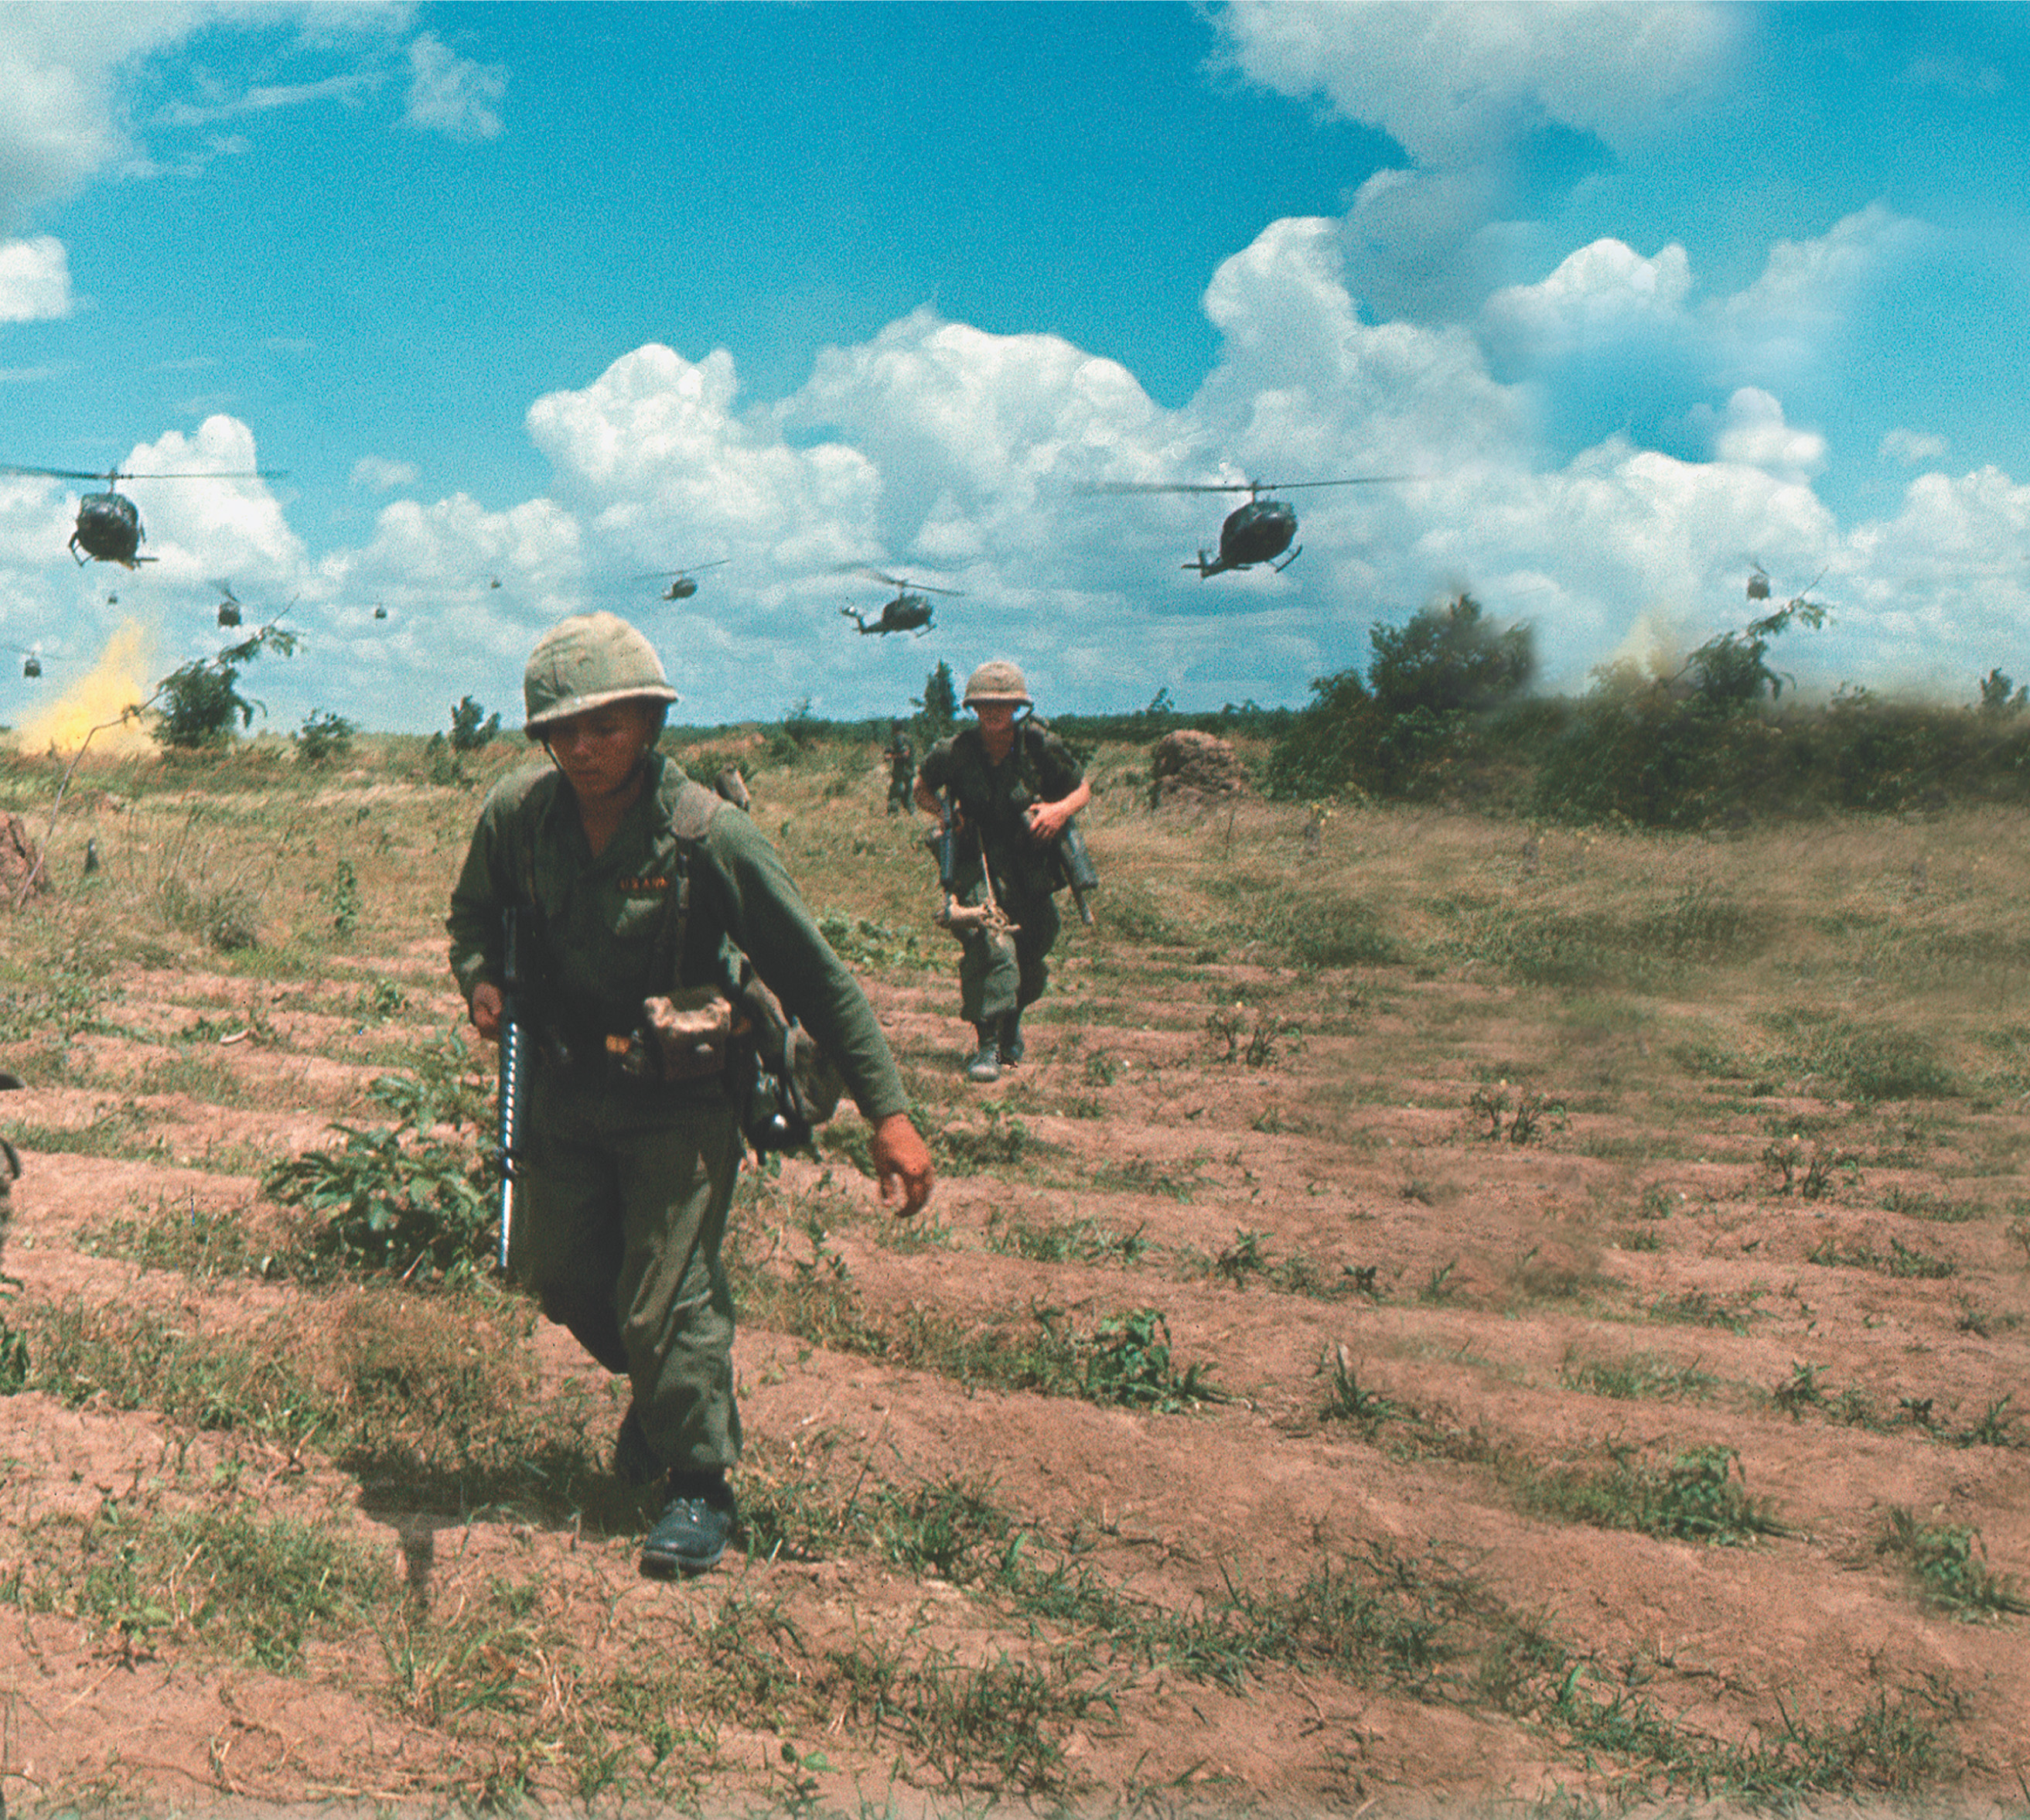 photo: soldiers walk across a field, while helicopters fly low overhead. A title: The Vietnam War Years.